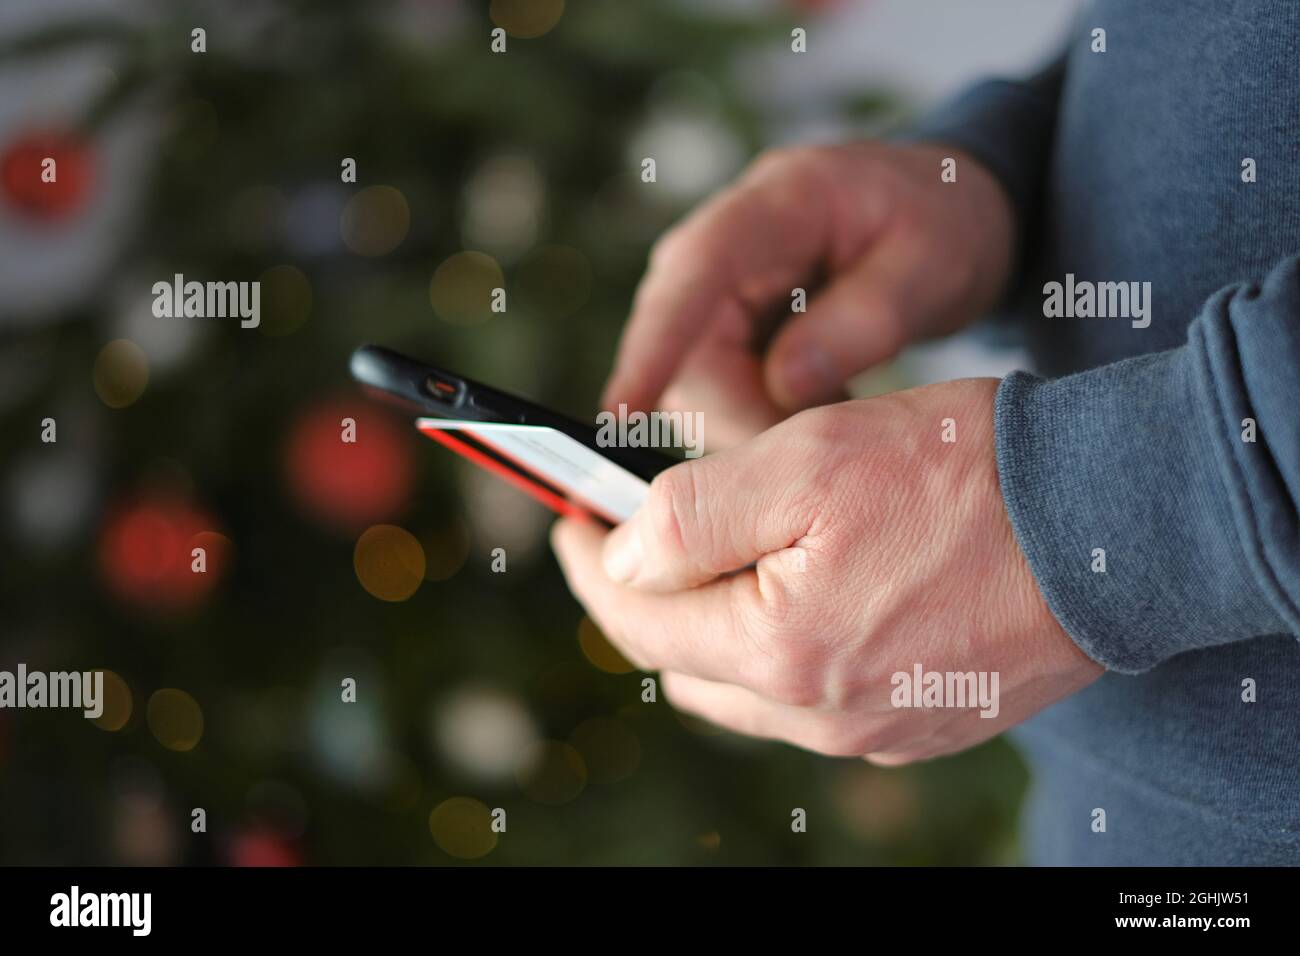 online shopping. Christmas and New Year shopping.Buying holiday gifts. Credit card and mobile phone in hands on shining Christmas tree background. Stock Photo